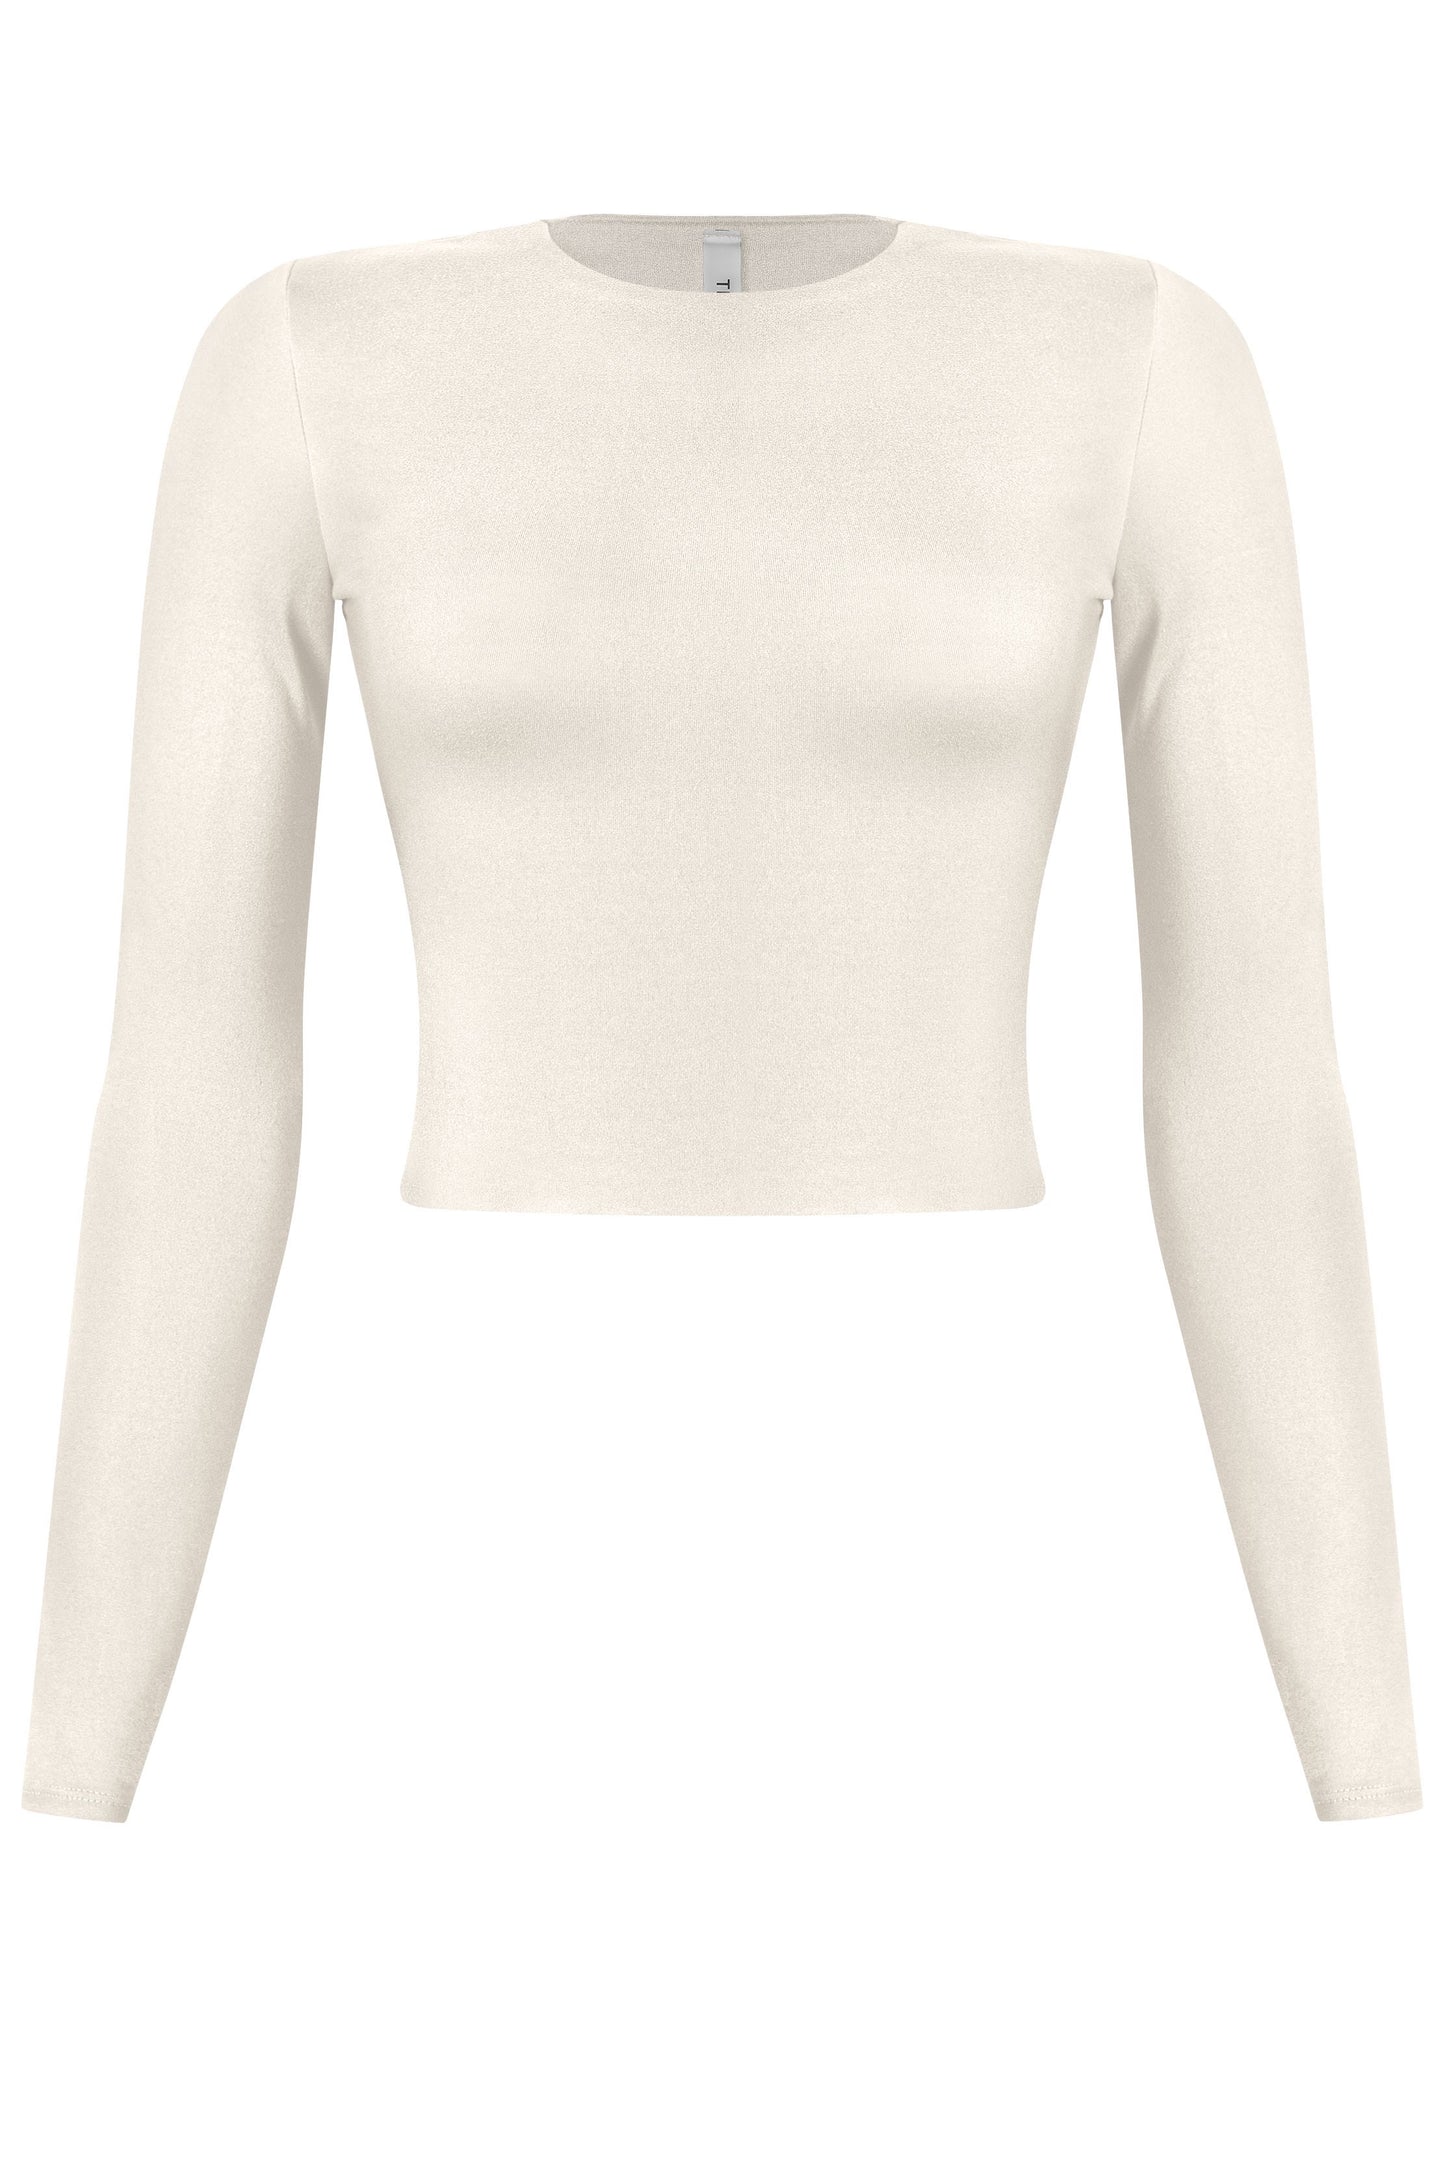 To cute double layered basic top